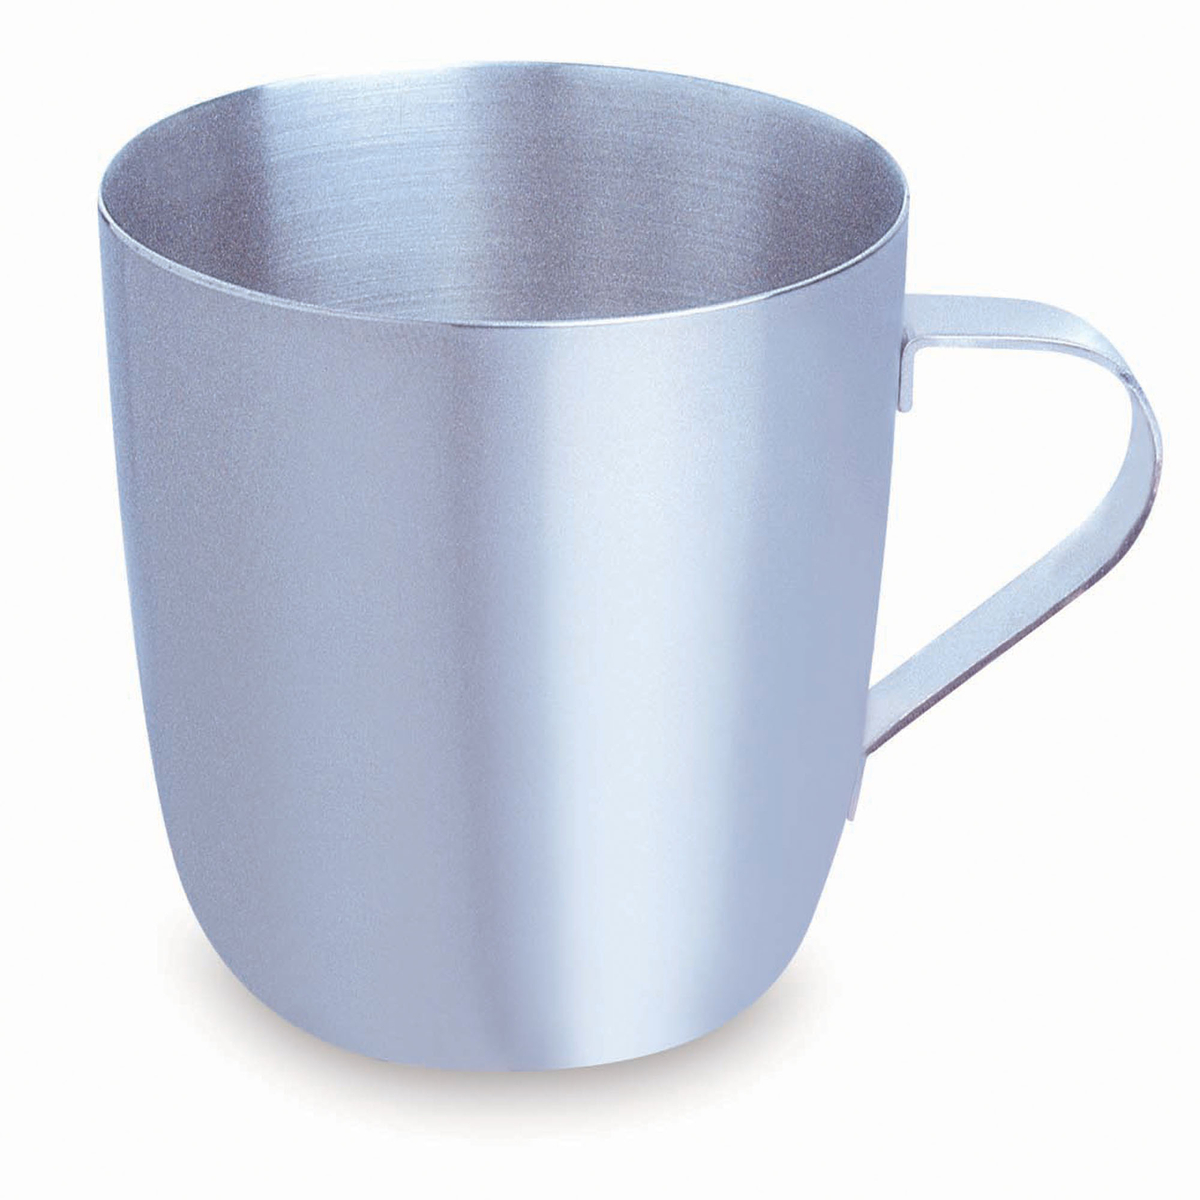 Zebra Stainless Steel Cup No.5, 112507